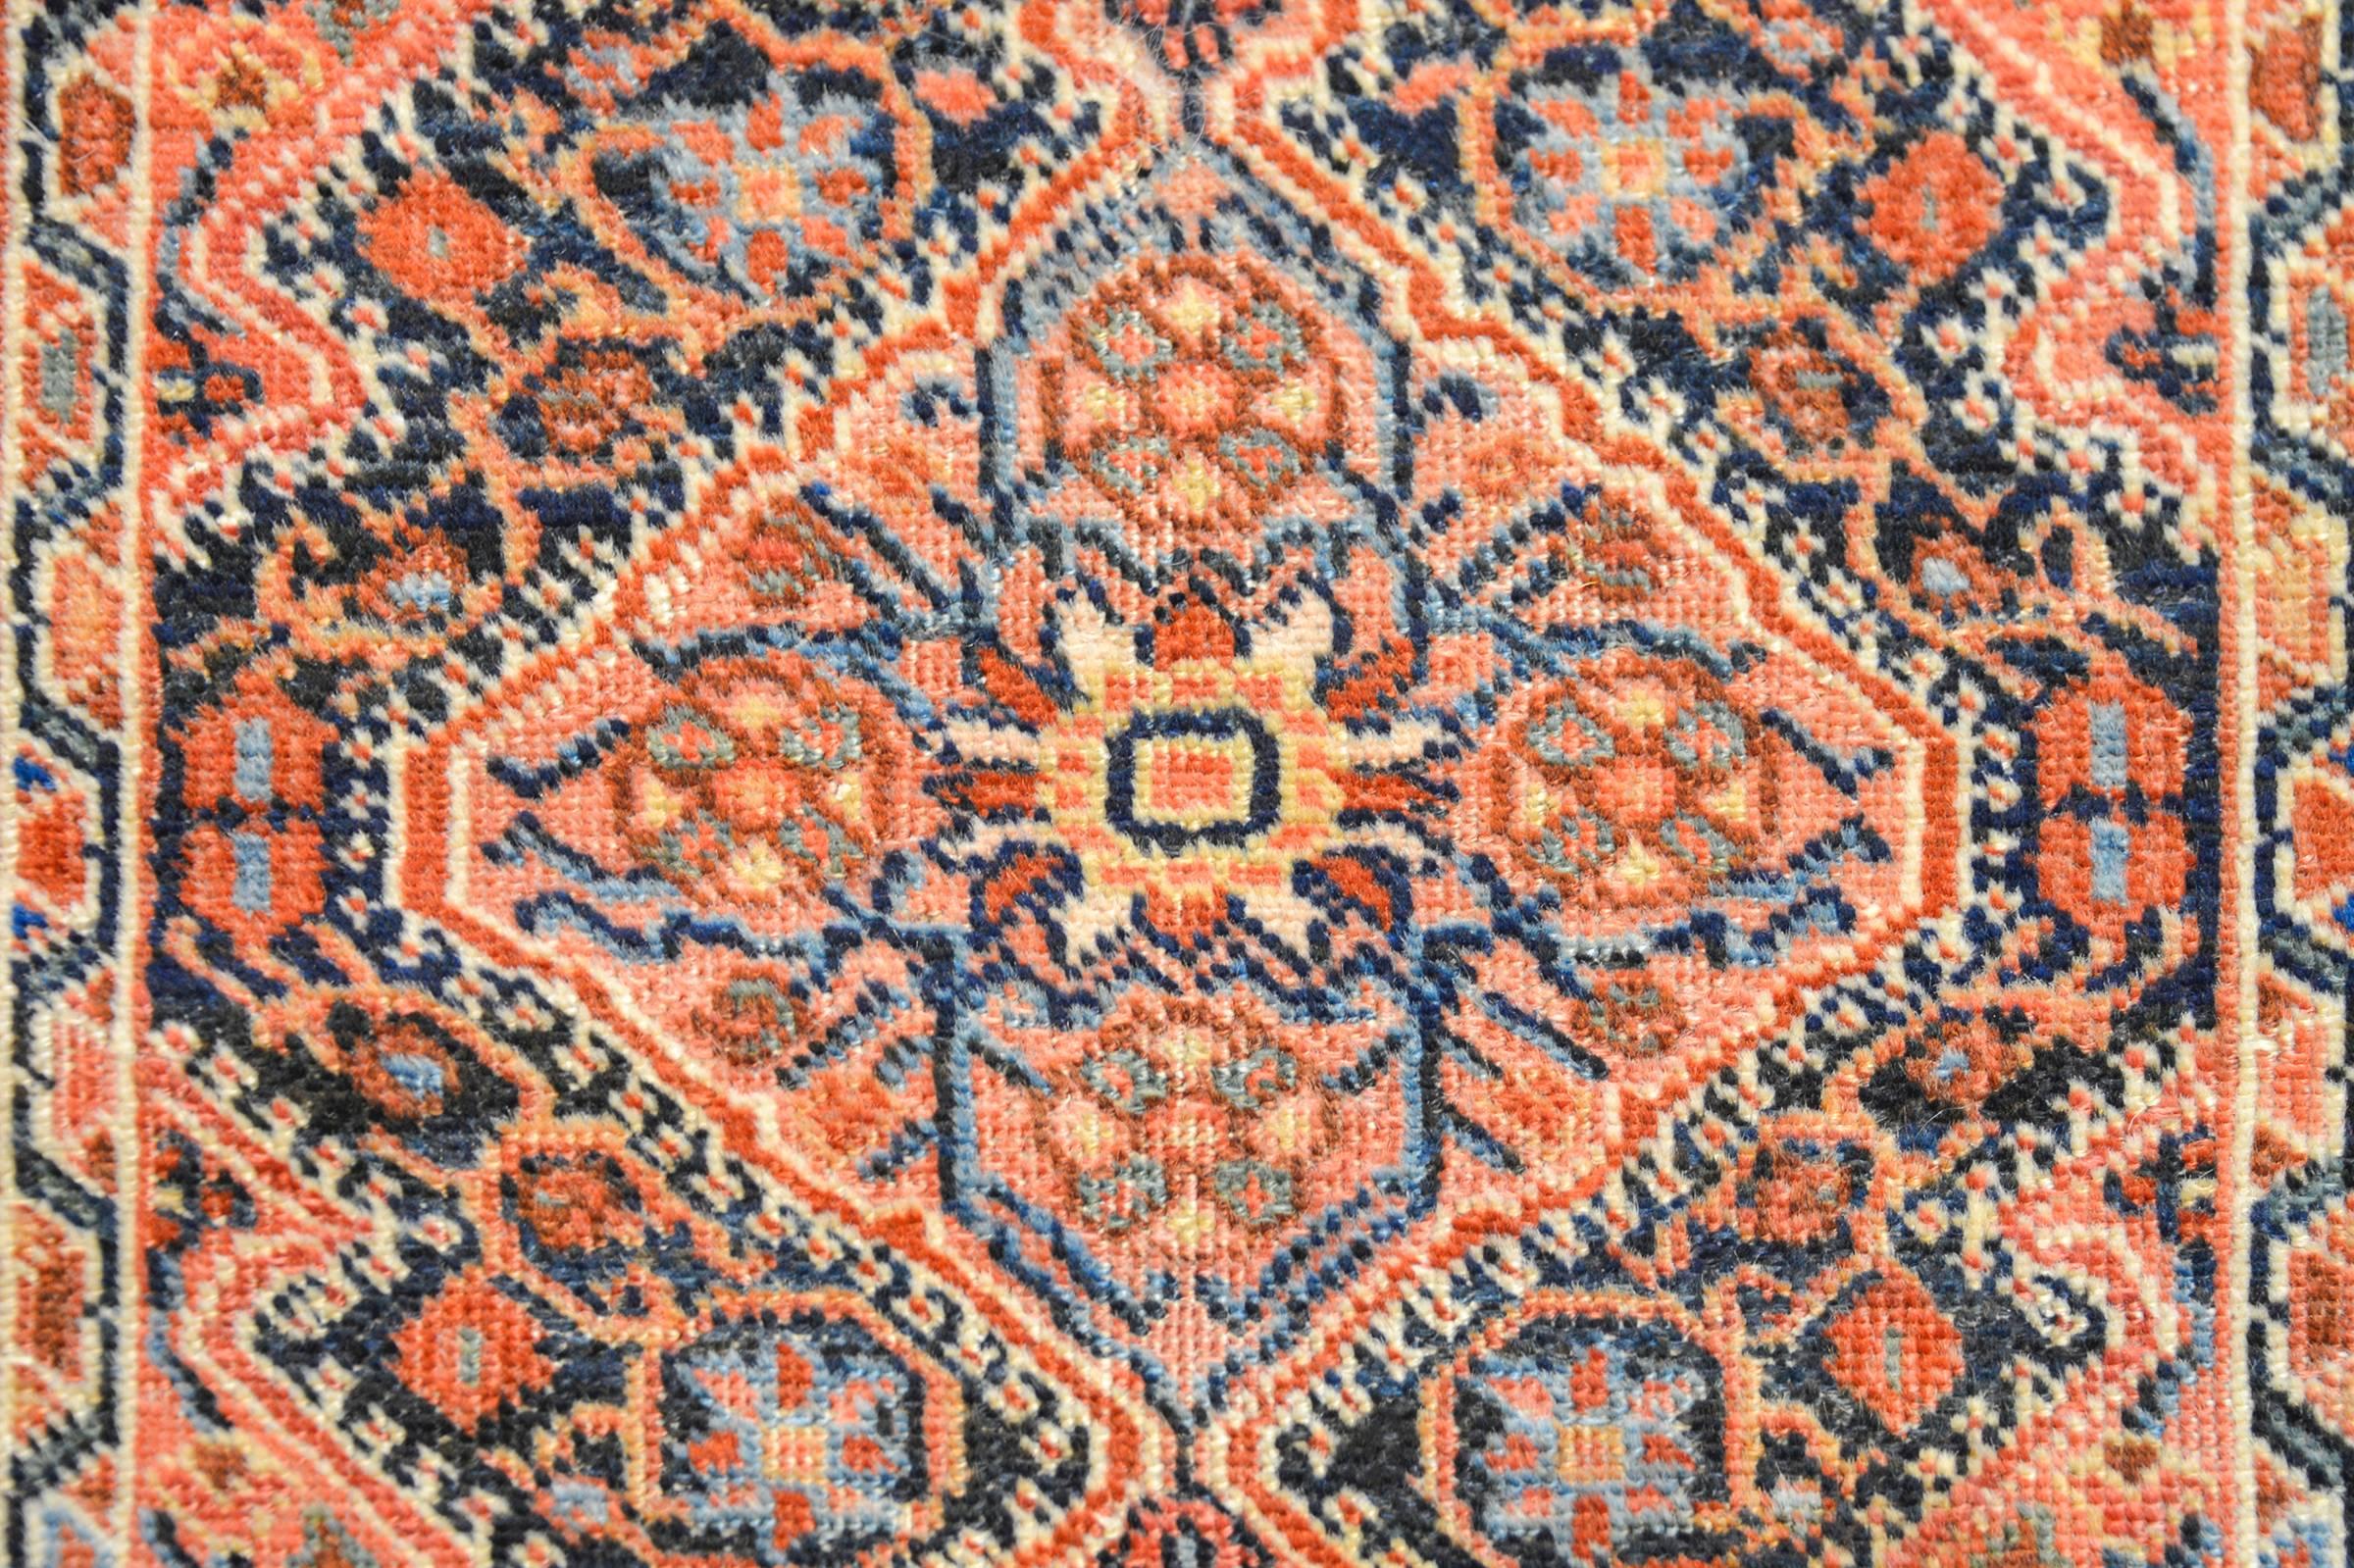 A rare late 19th century Persian Sarouk Farahan sample showing the extraordinary rendering and technical skills of the weaver. The patterns are traditional, with expertly styled floral and vine patterns. The border is complementary with similar